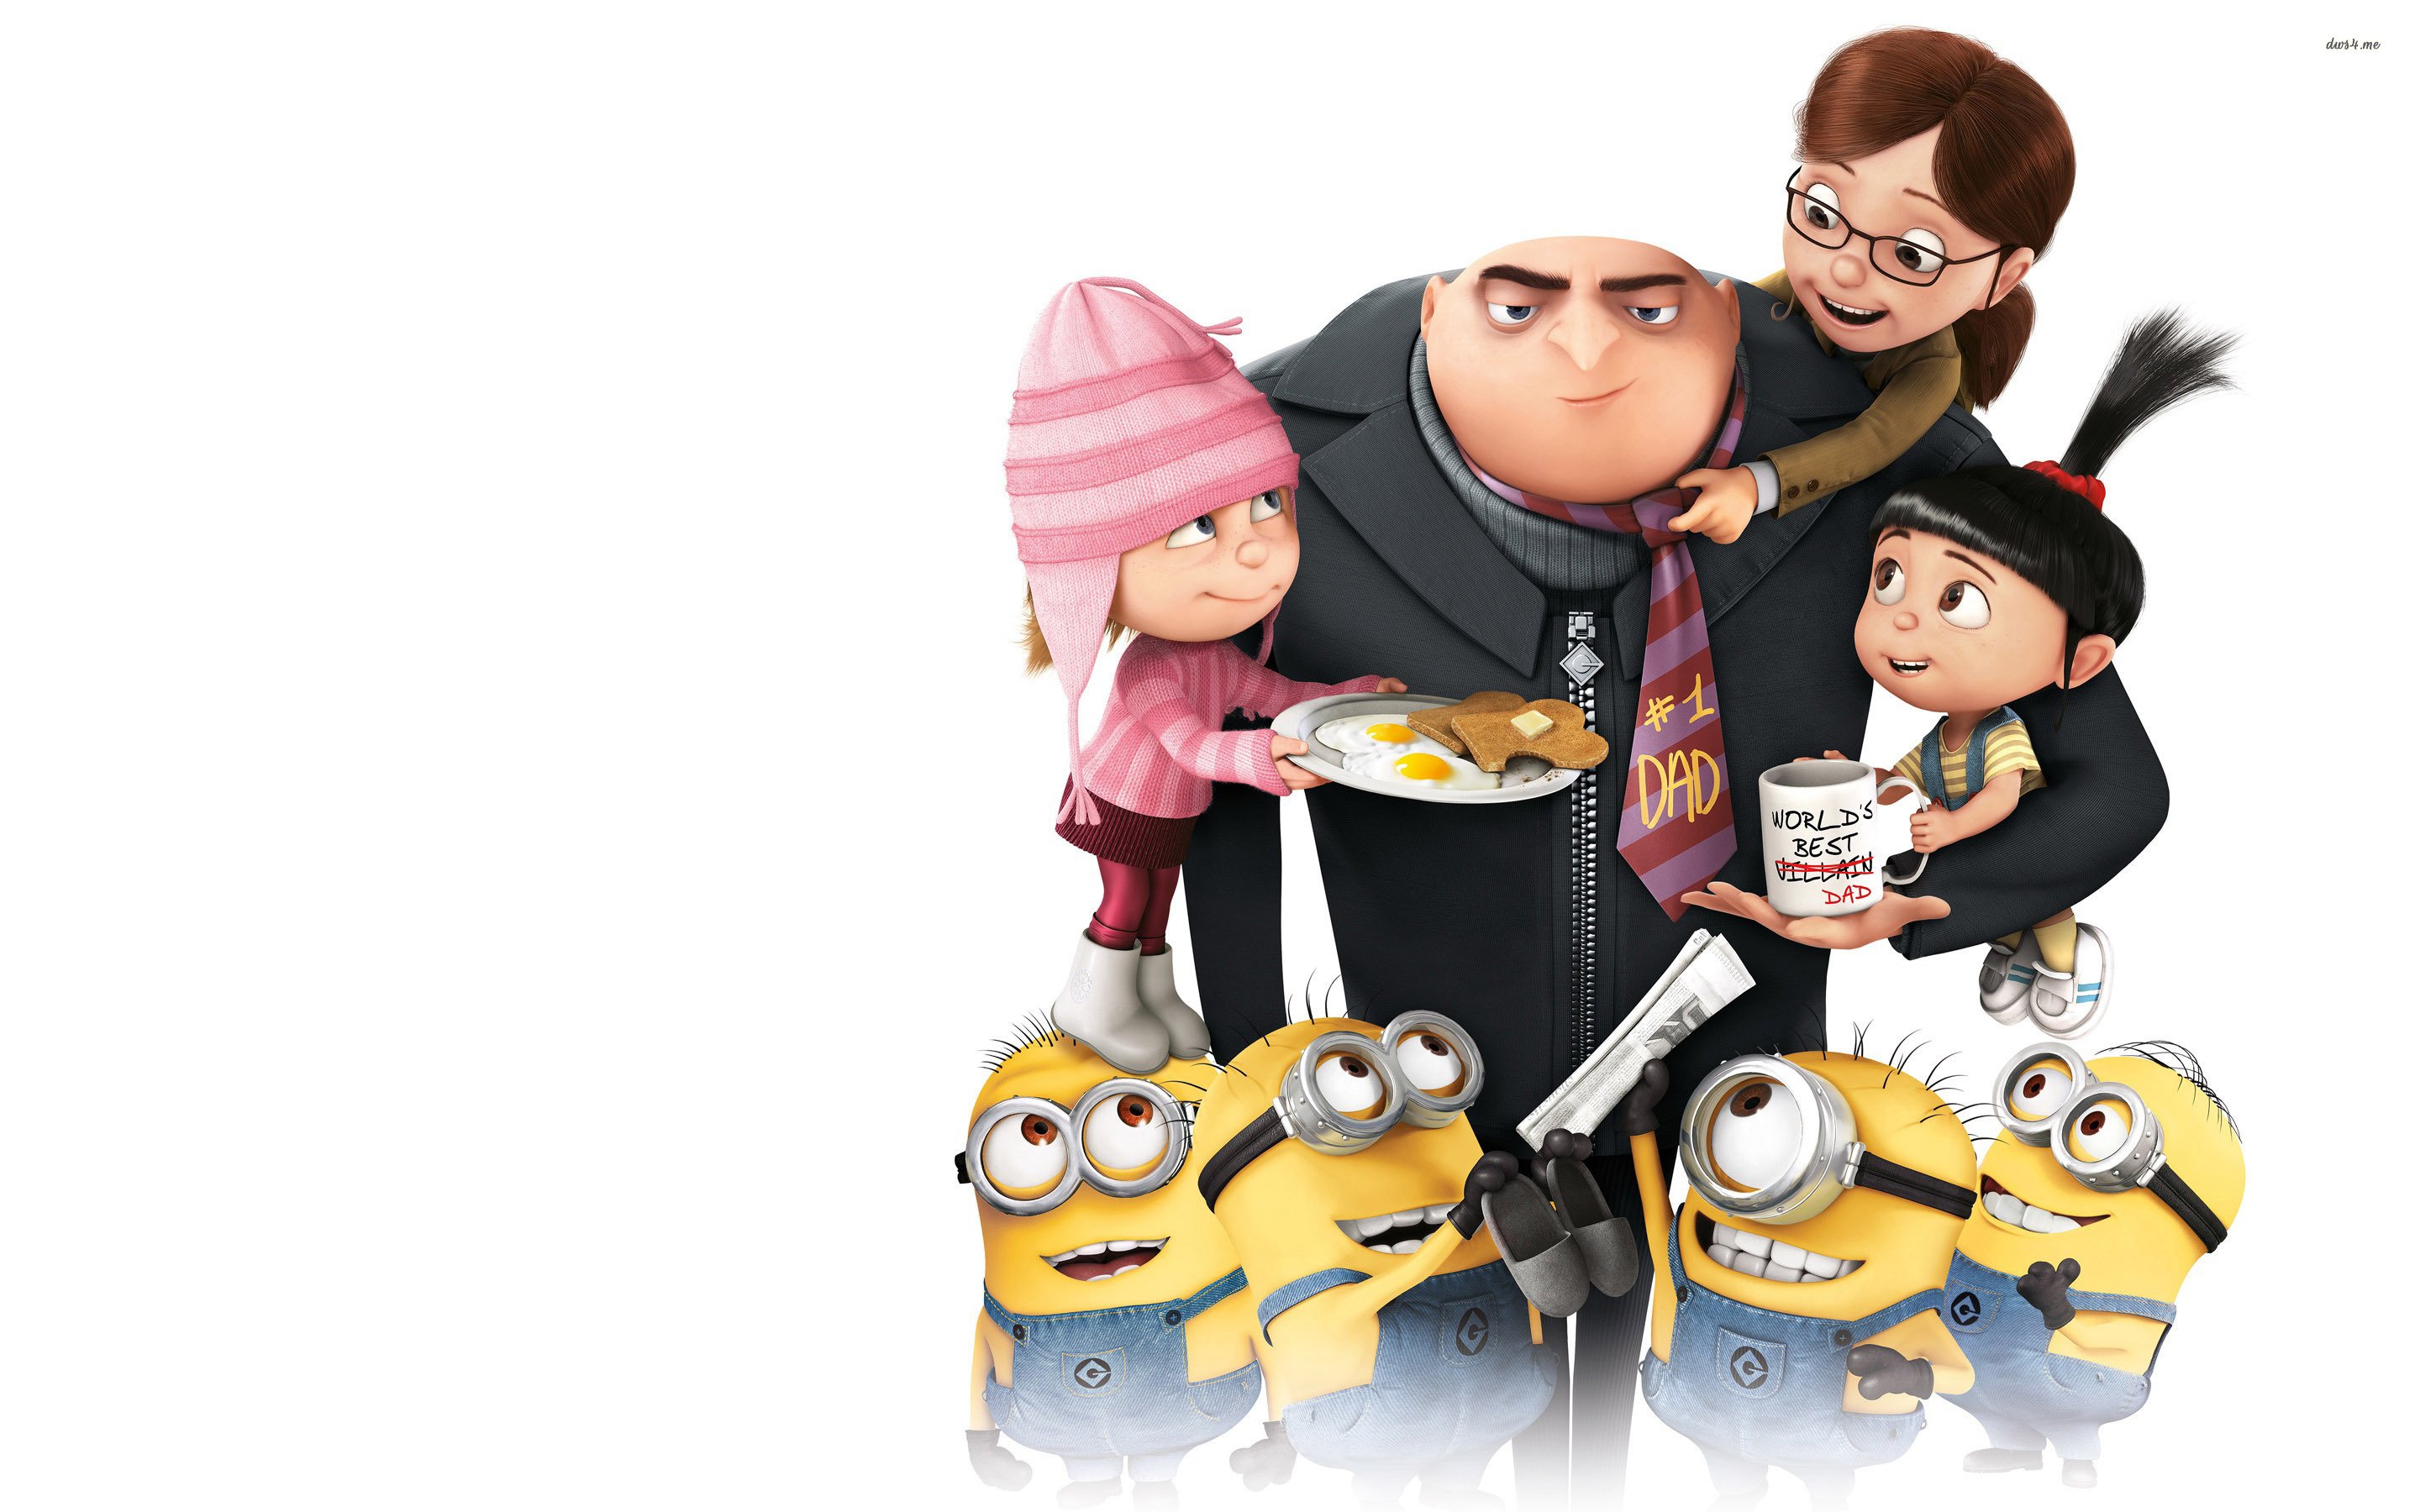 Despicable Me 2 Wallpaper » WallDevil - Best free HD desktop and ...